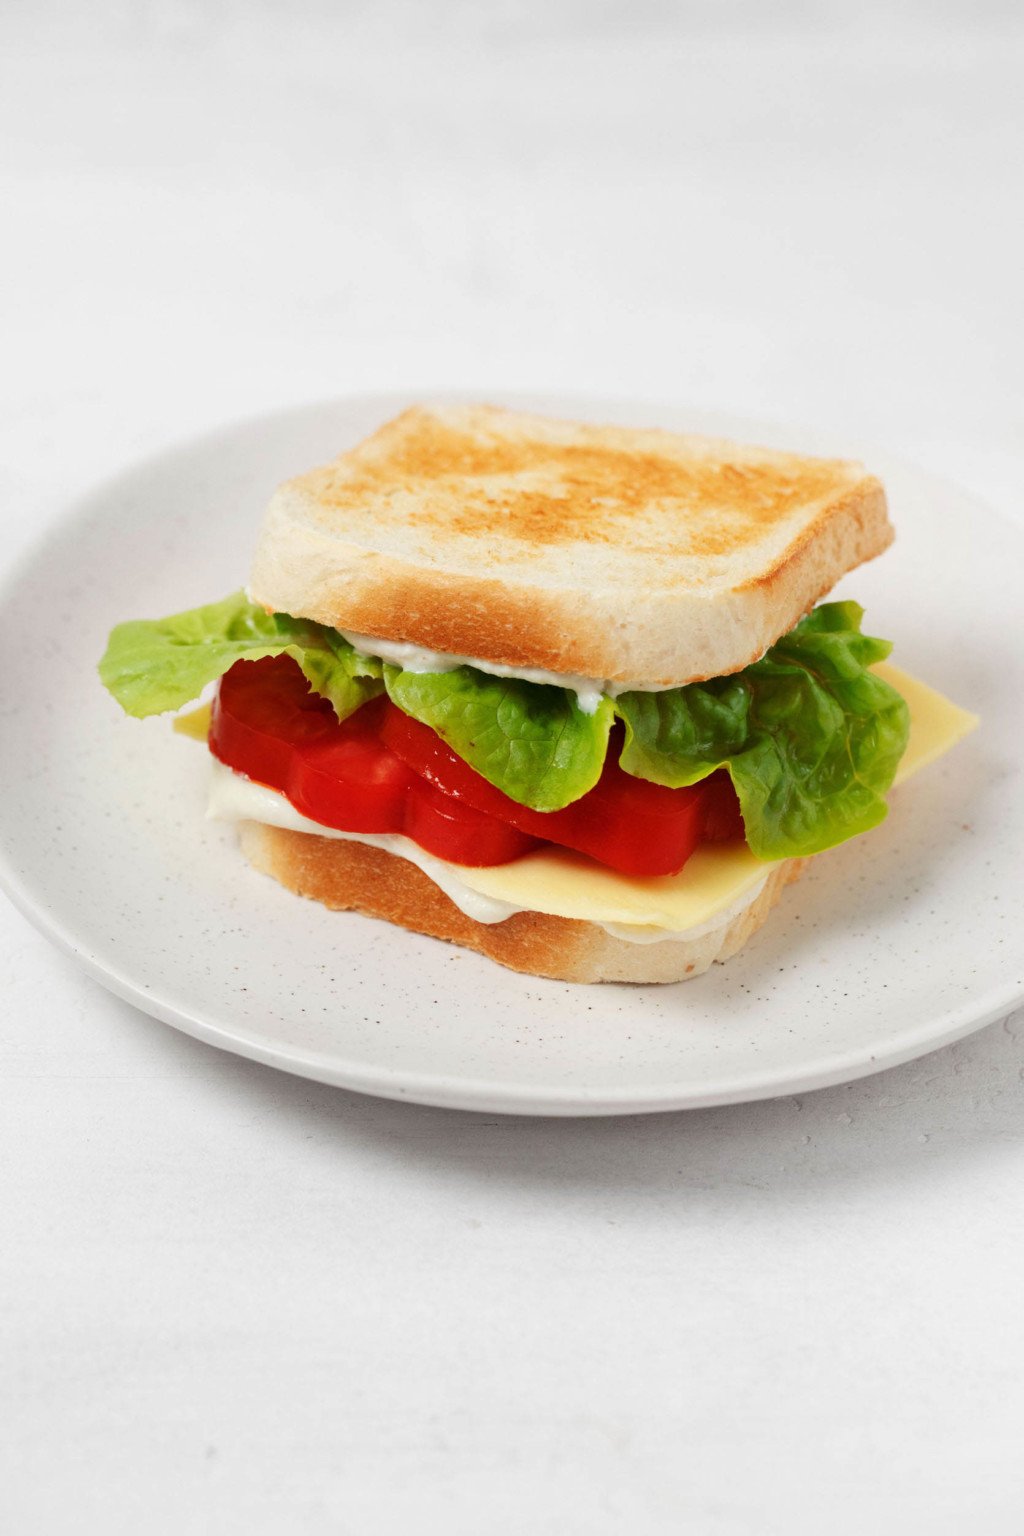 A tomato, lettuce, and cheese sandwich is sitting on a small, round white plate.